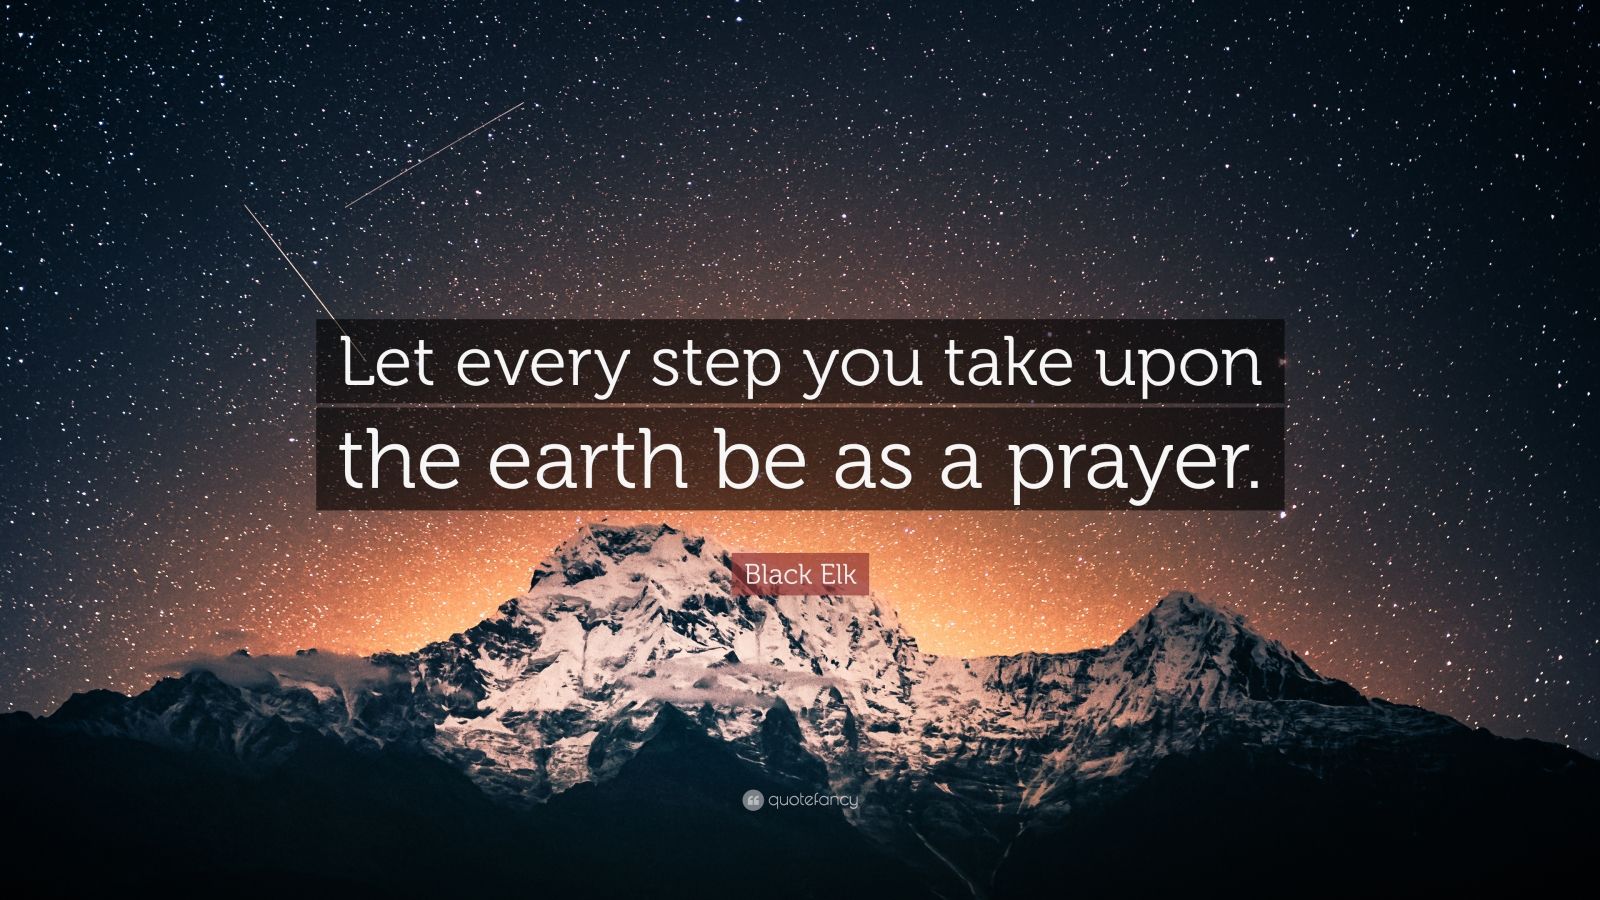 2241055-Black-Elk-Quote-Let-every-step-you-take-upon-the-earth-be-as-a.jpg